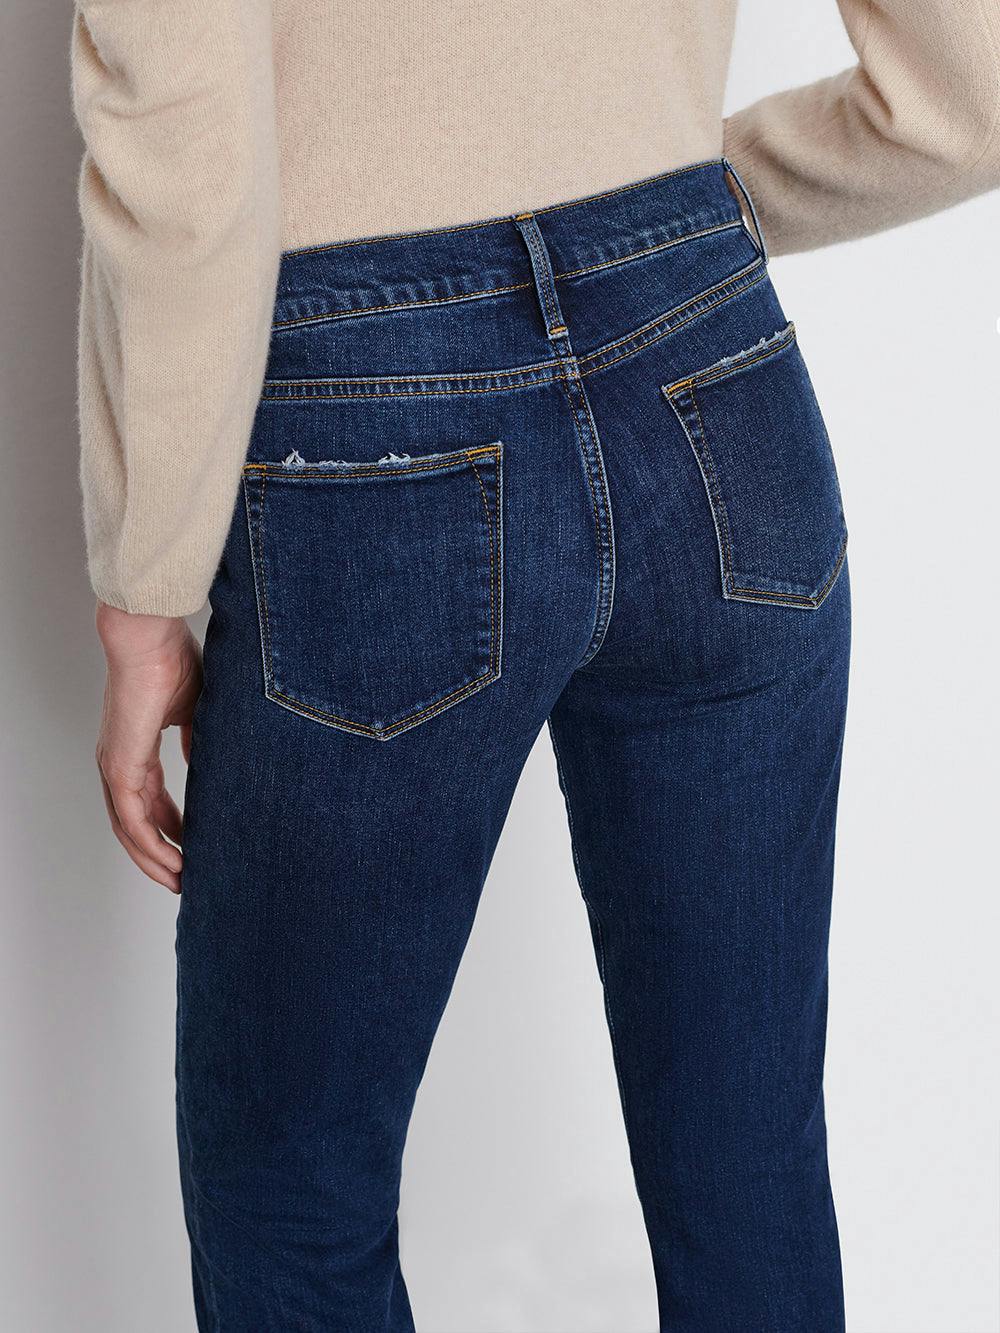 jeans detail view